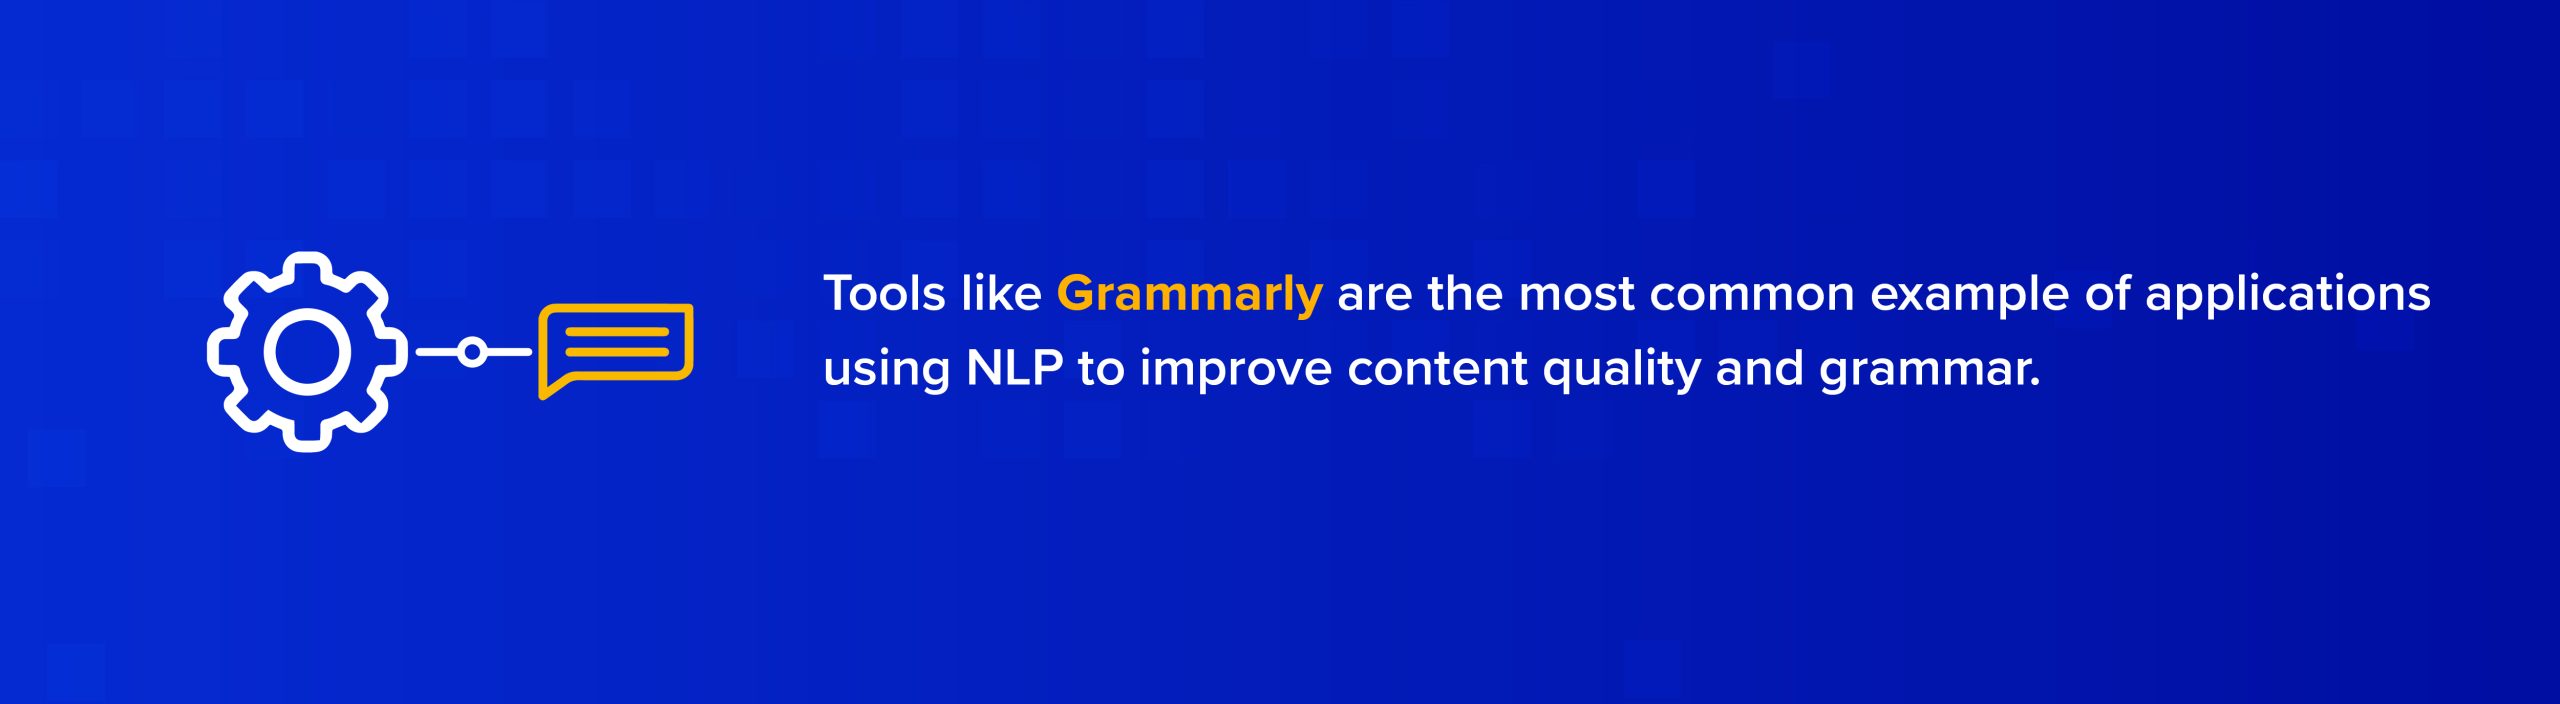 Grammarly Example of NLP